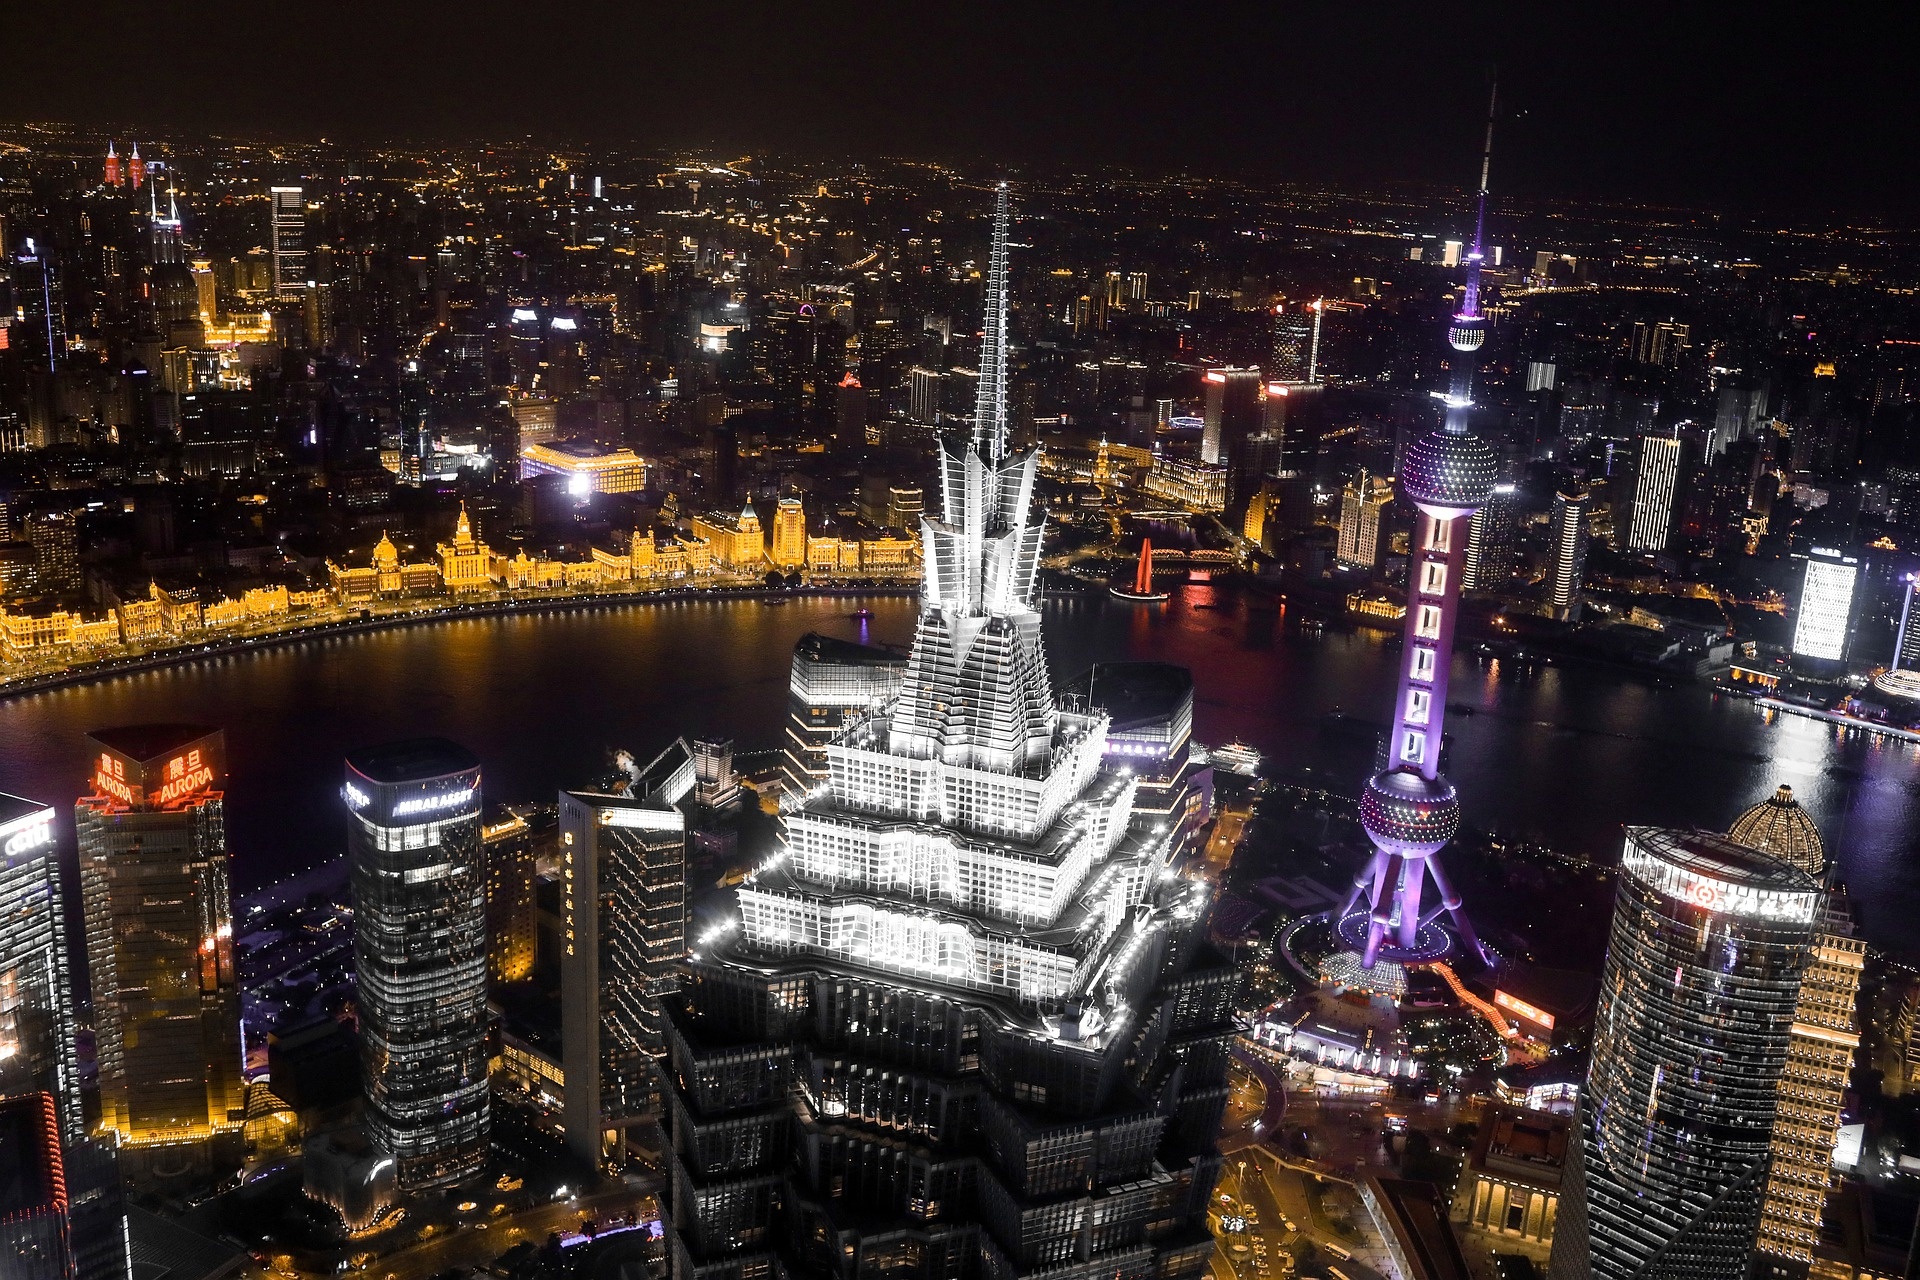 Jin Mao, Tower wallpapers, Background images, Architectural photography, 1920x1280 HD Desktop